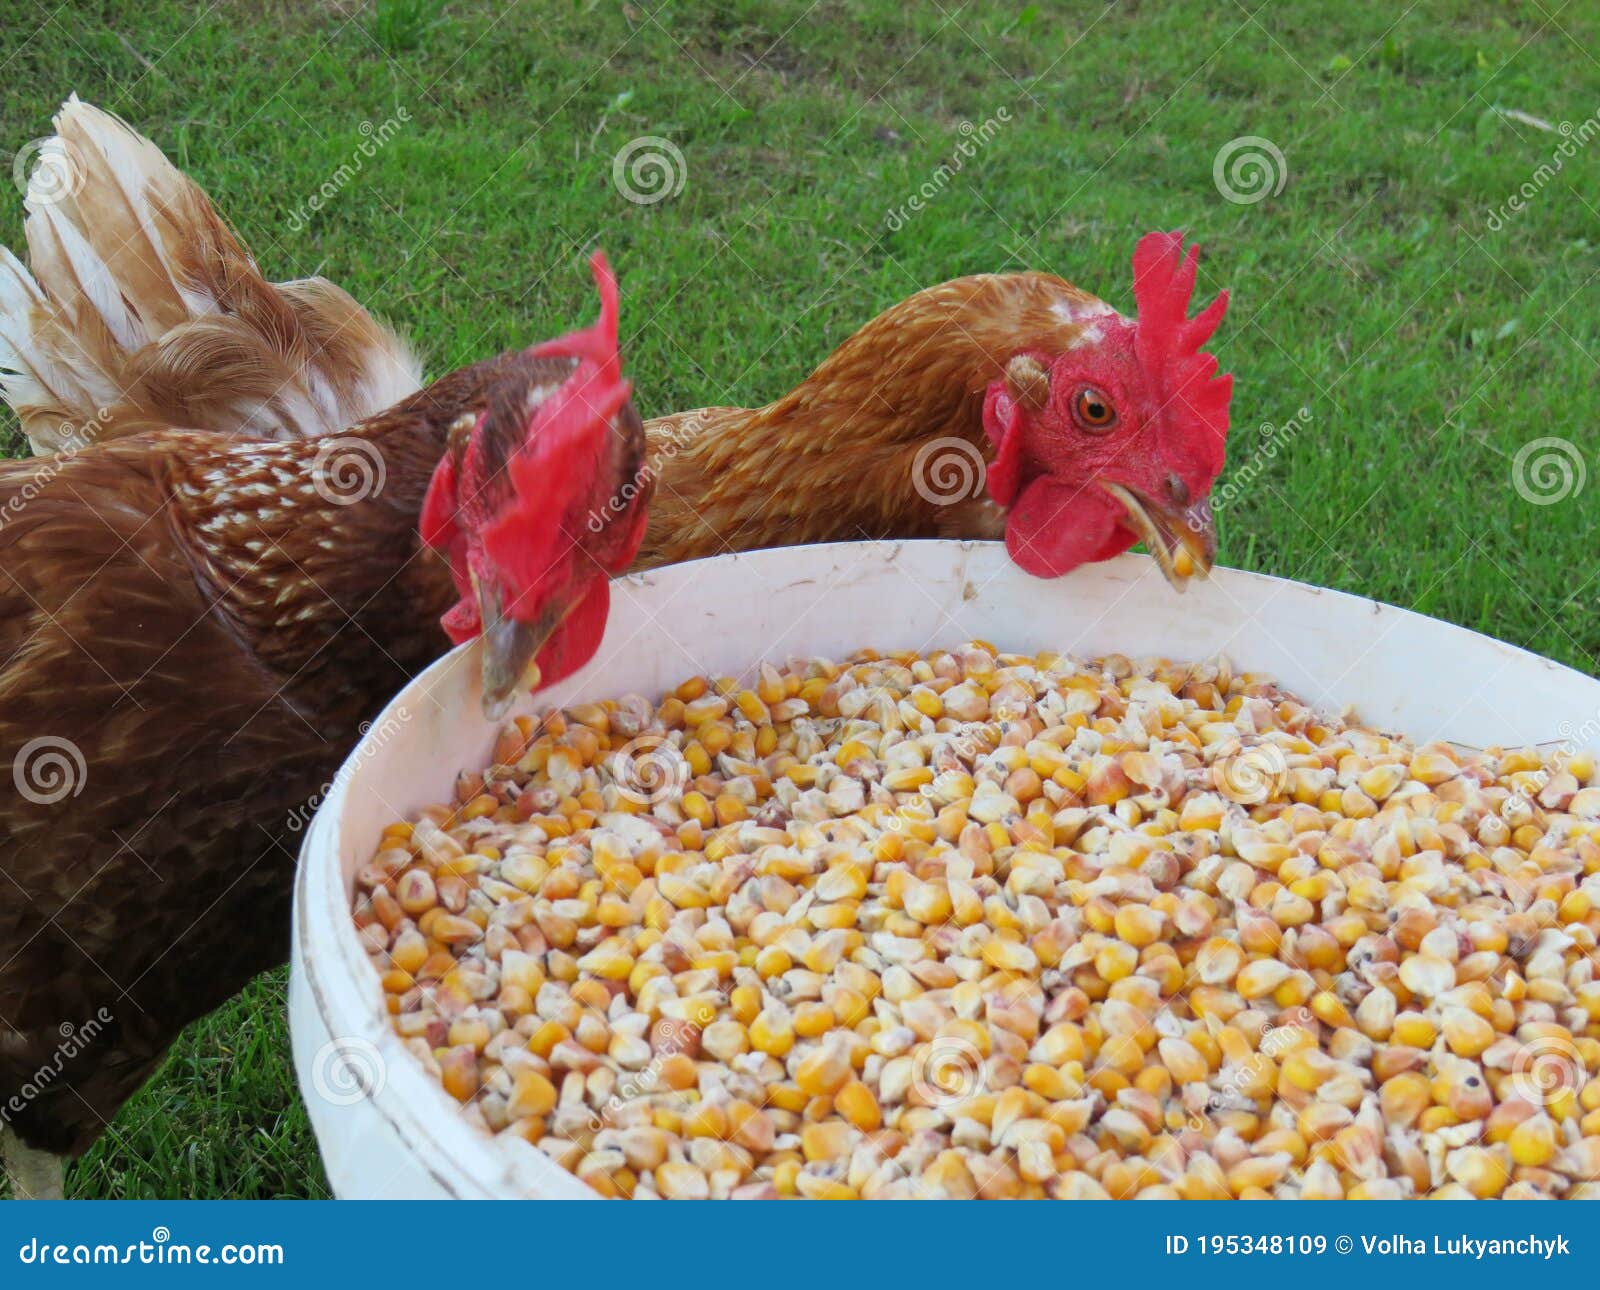 Chickens Eating Stock Image 31525609